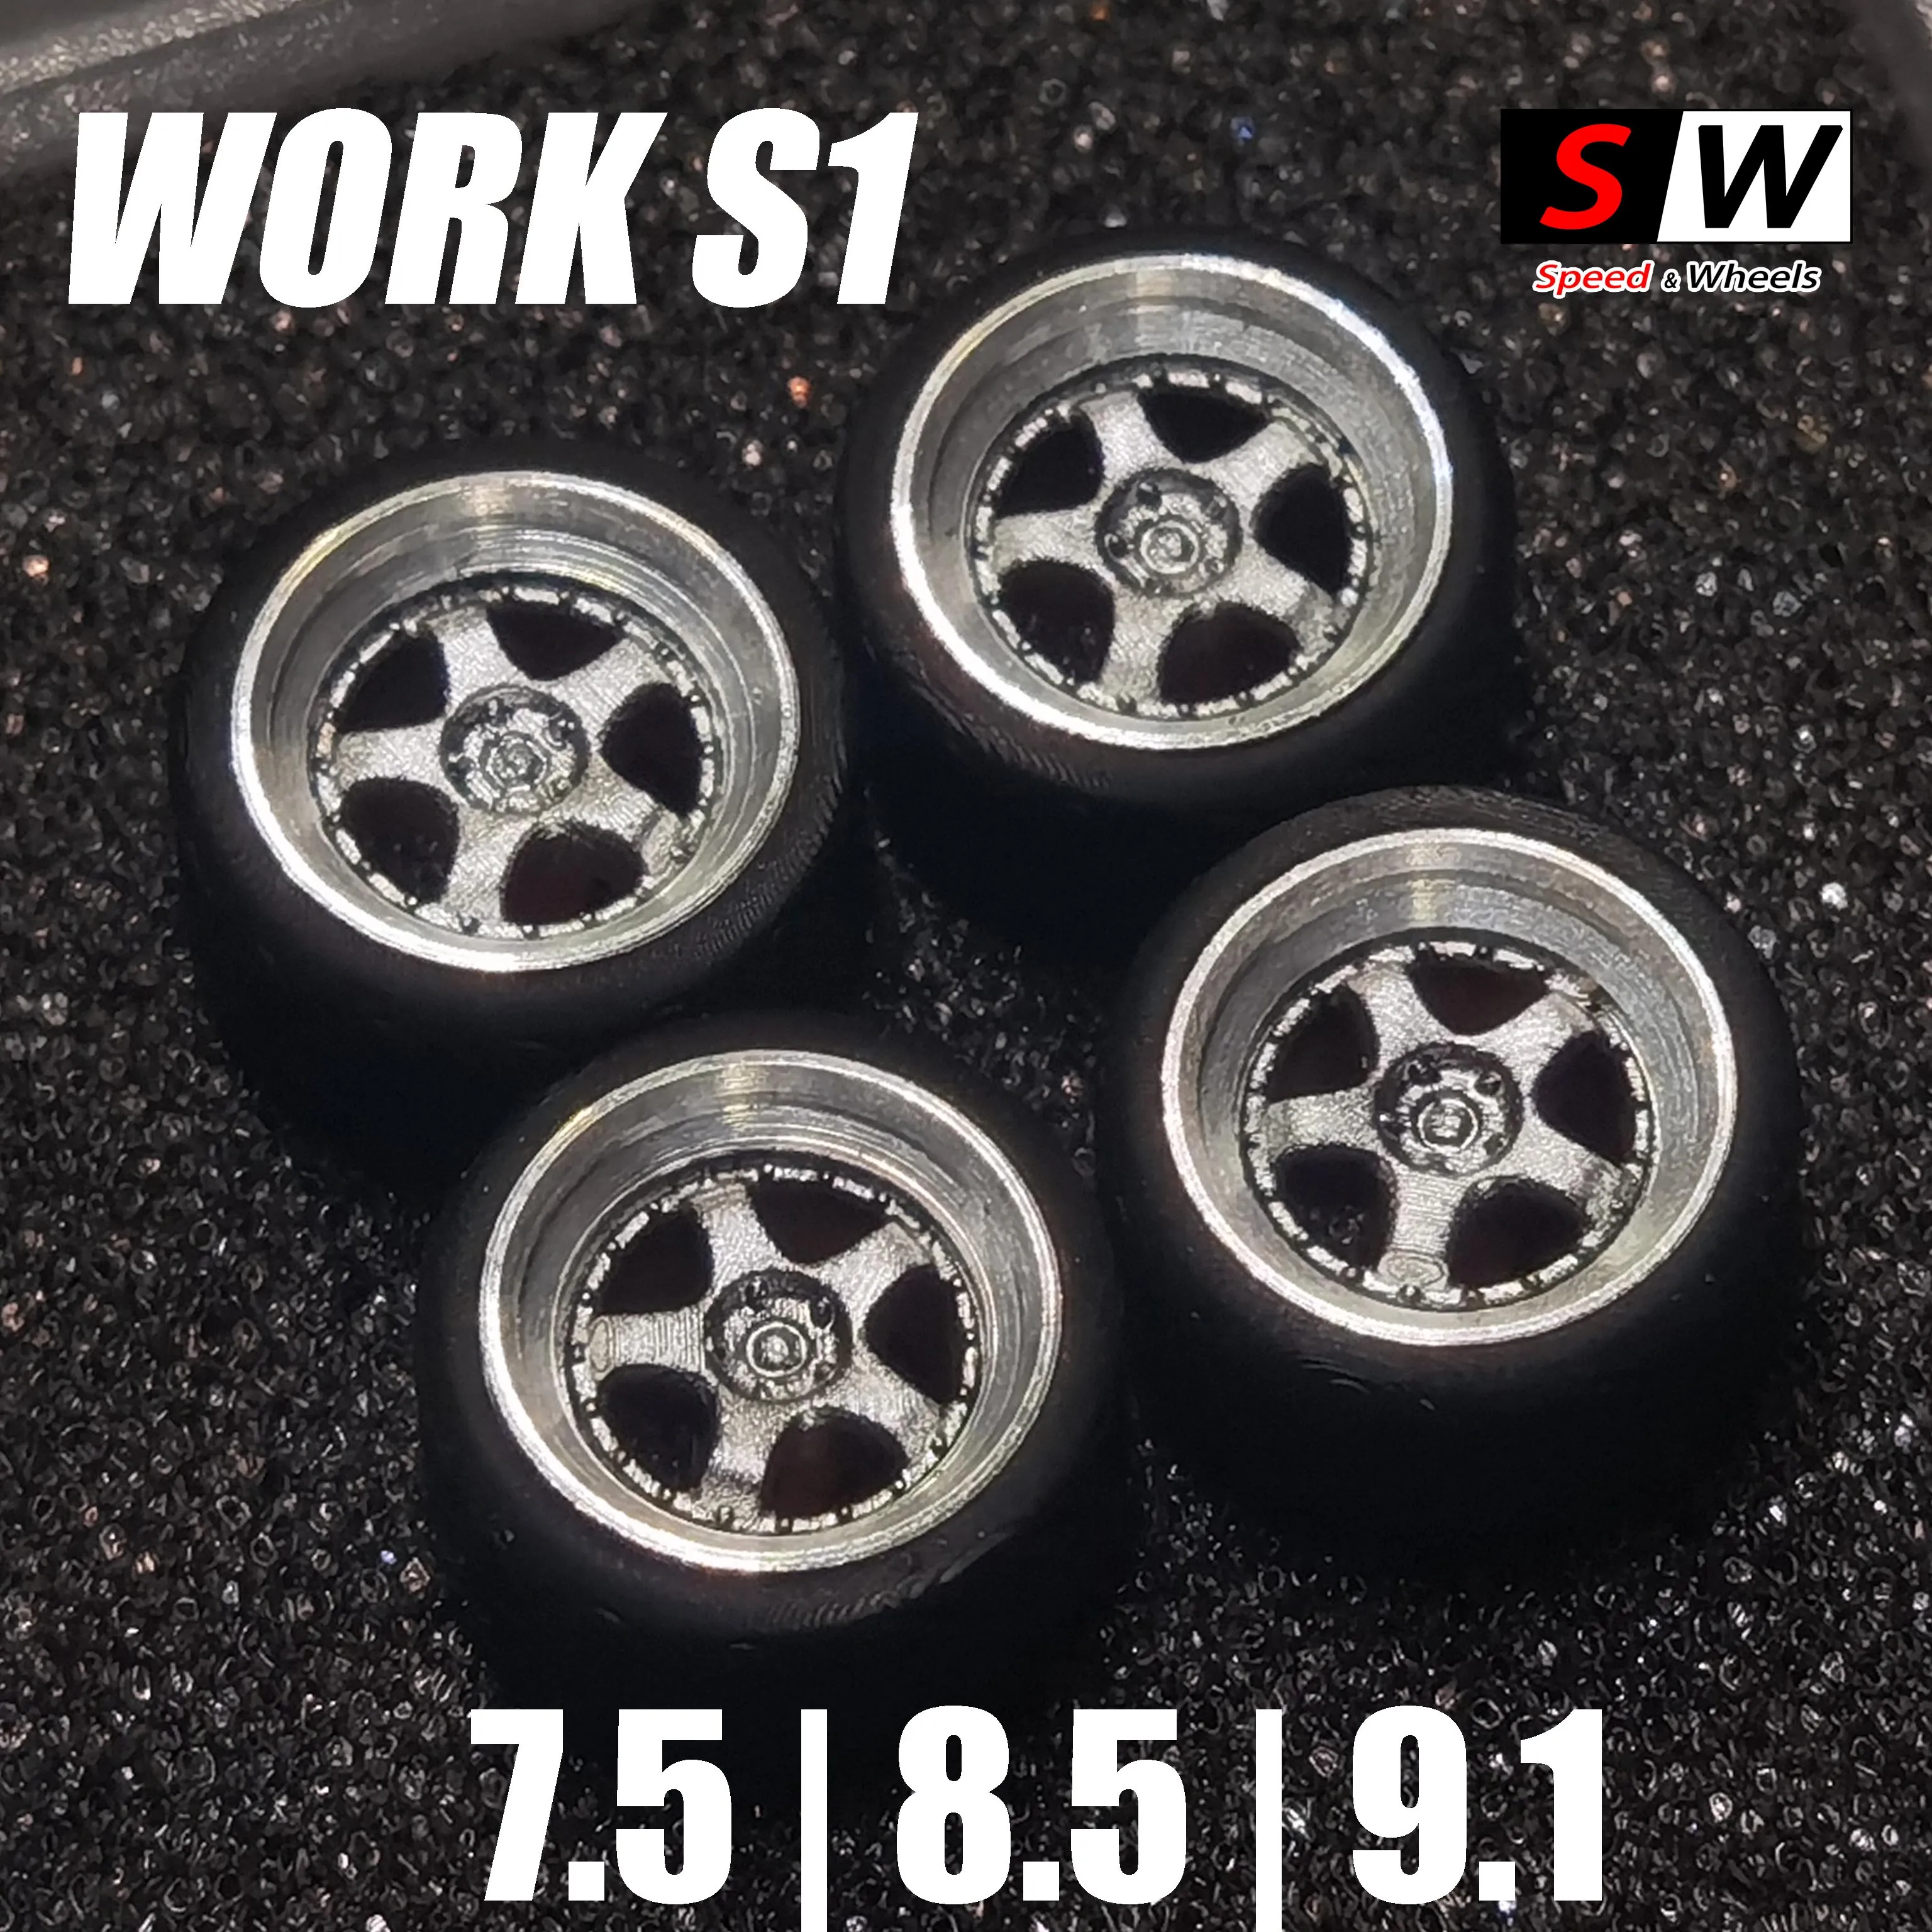 1 64 Alloy Wheel Rubber Tires work s1 7.5m/8.5mm/9.1mm for 1:64 Car Model Modification